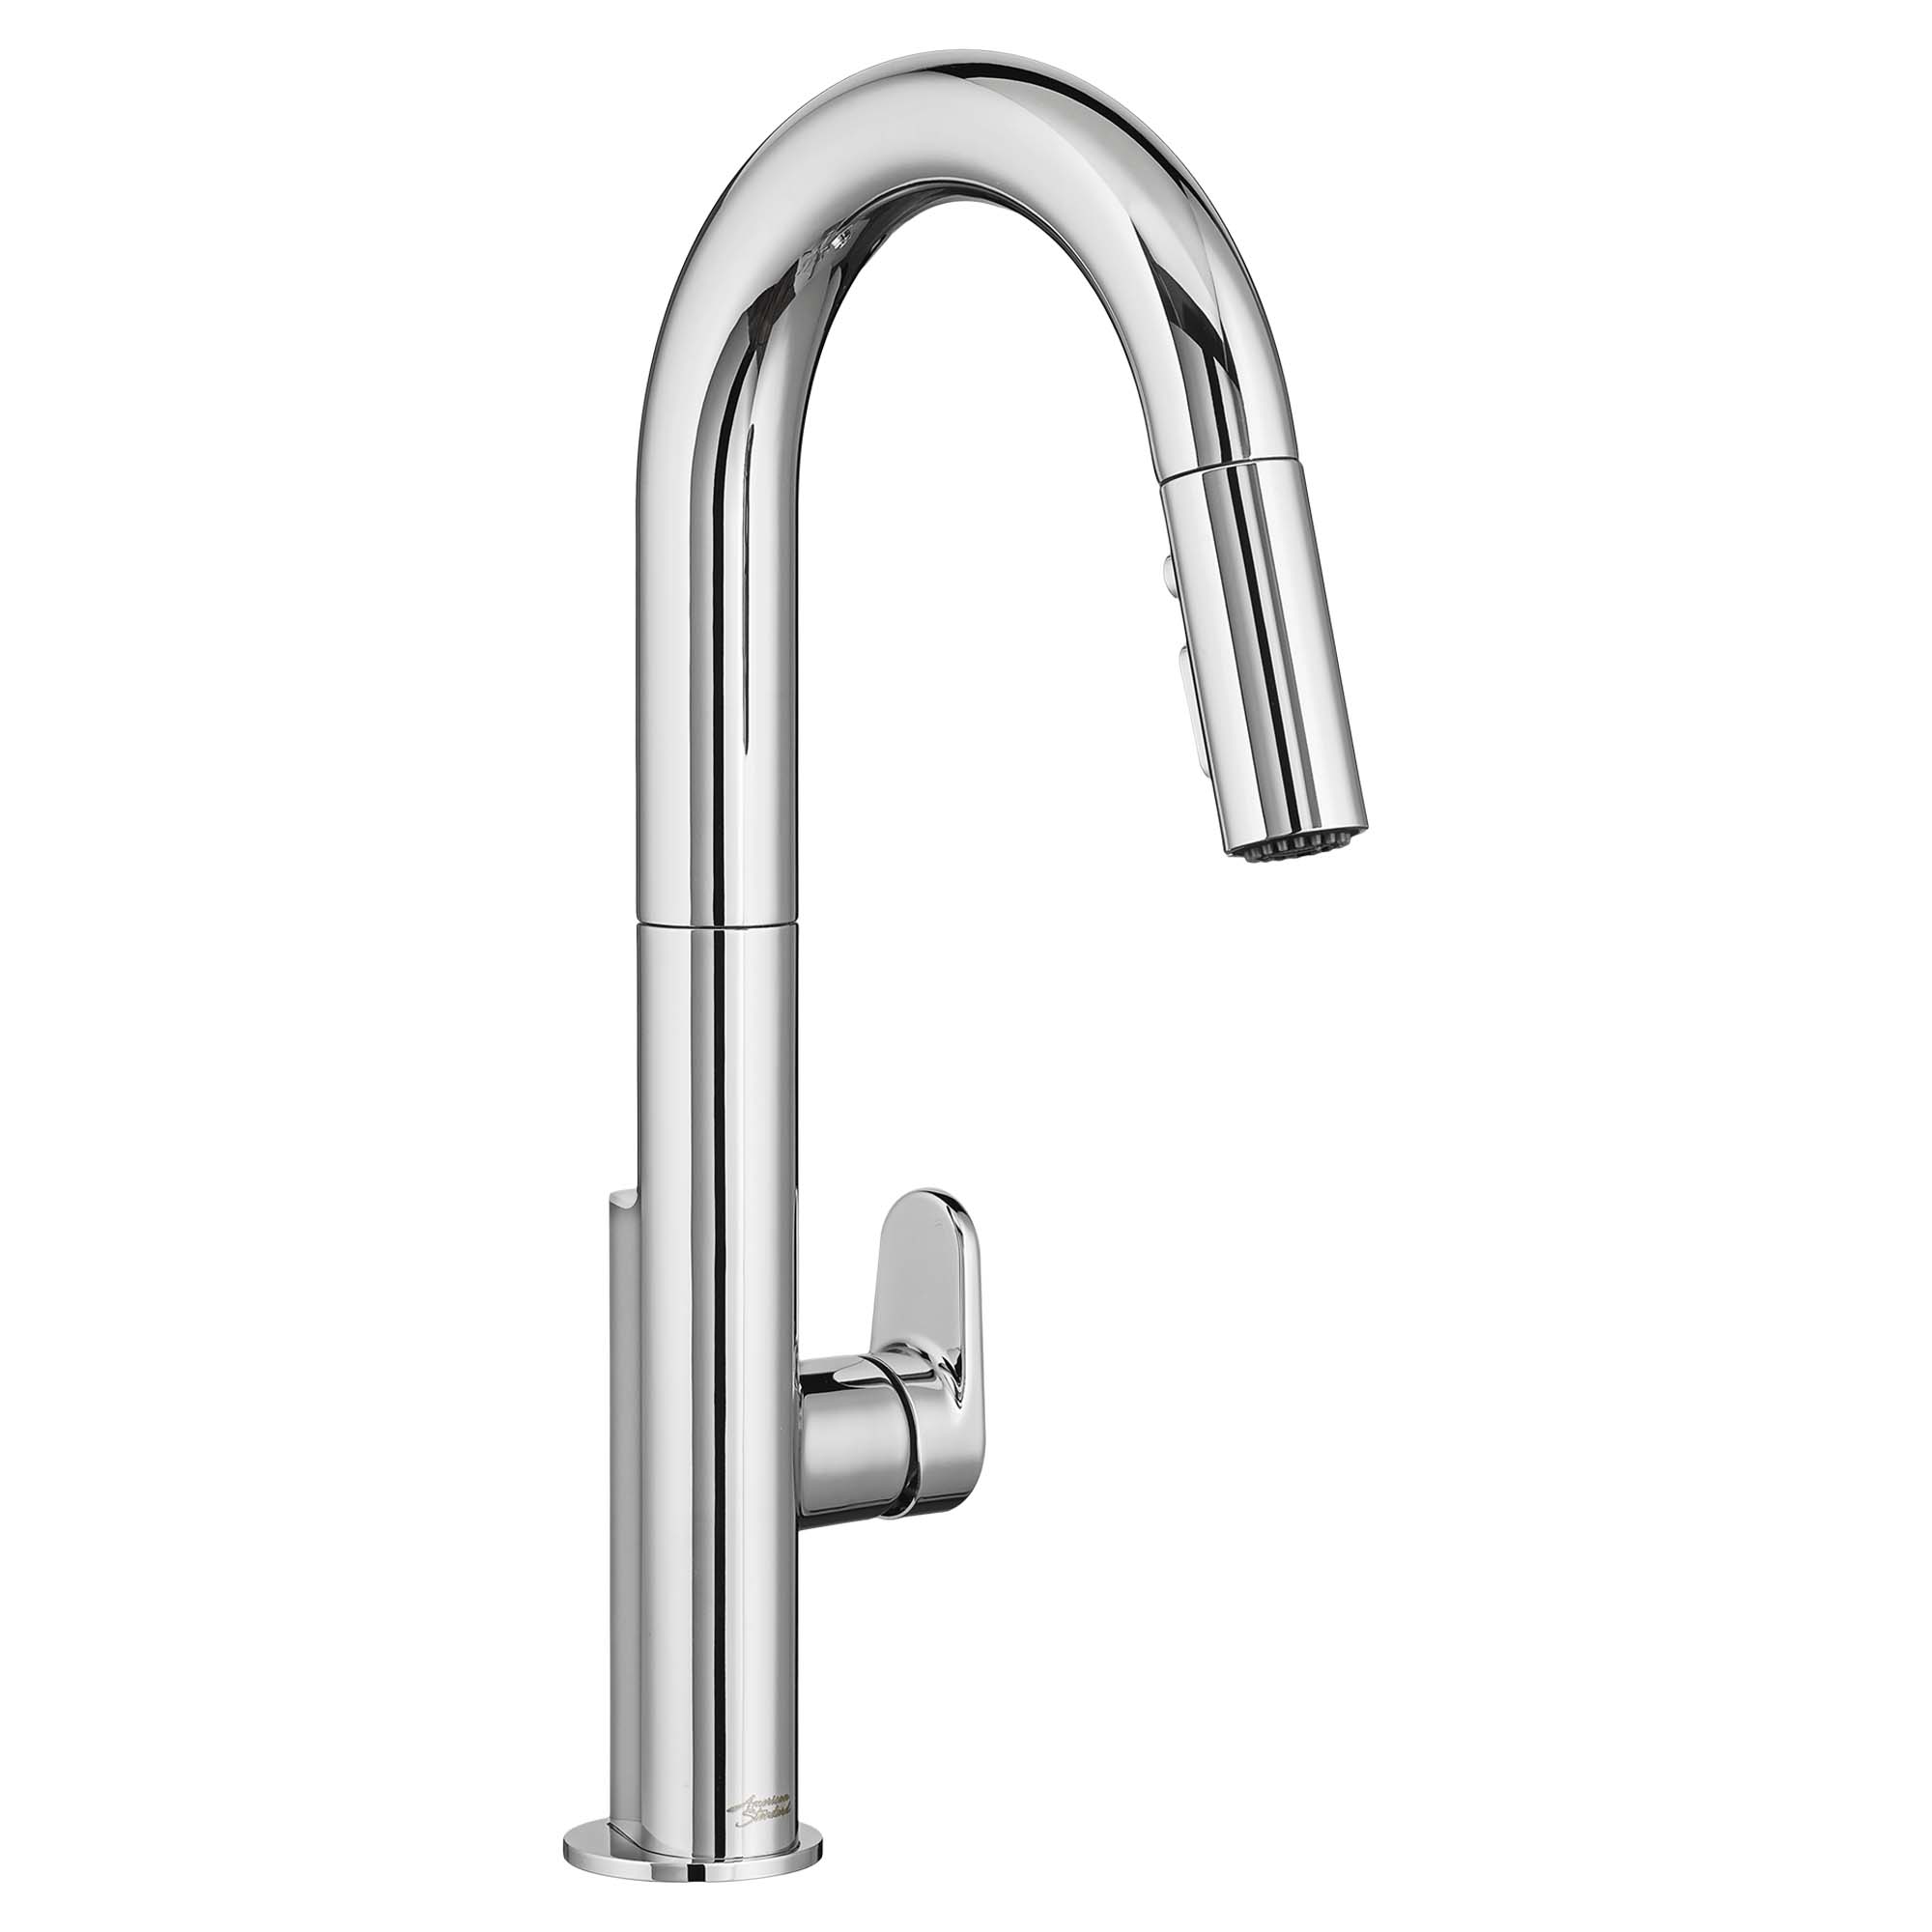 Beale Single Handle Pull-Down Spray Kitchen Faucet in Polished Chrome